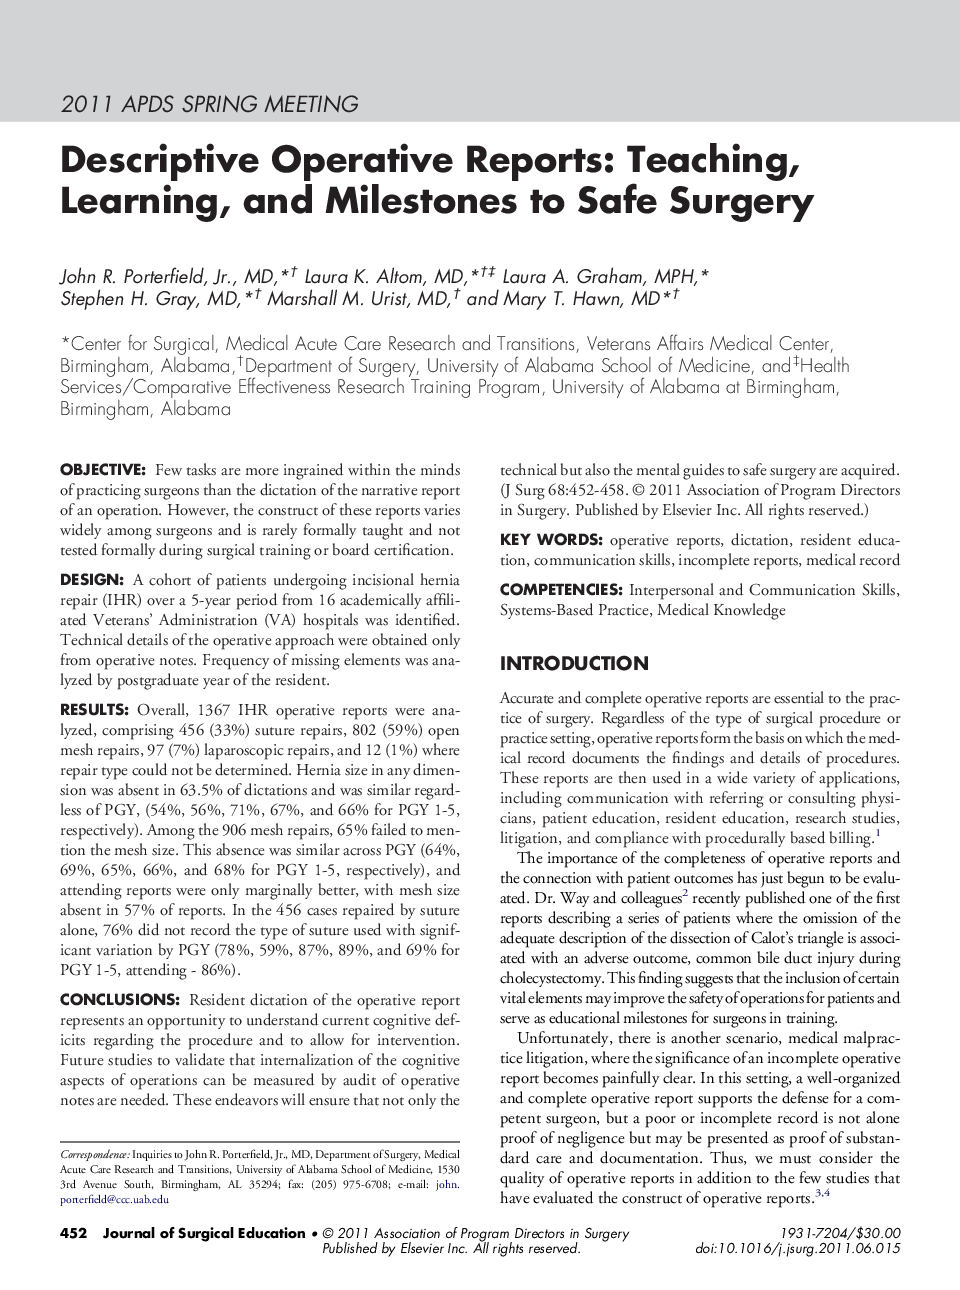 Descriptive Operative Reports: Teaching, Learning, and Milestones to Safe Surgery